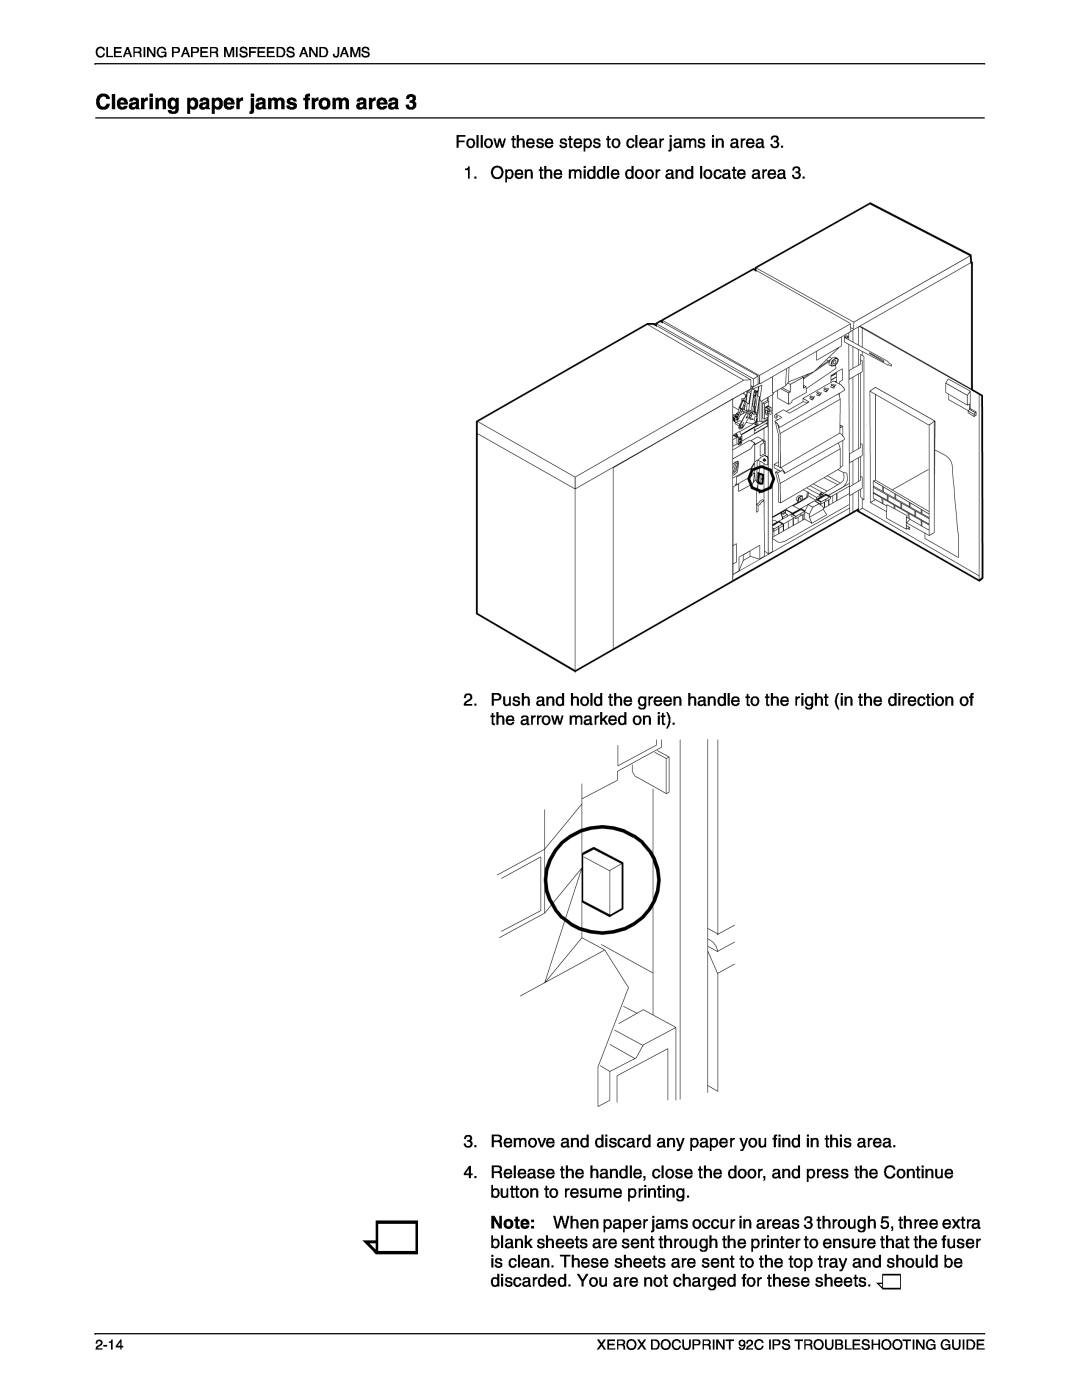 Xerox 92C IPS manual Clearing paper jams from area 